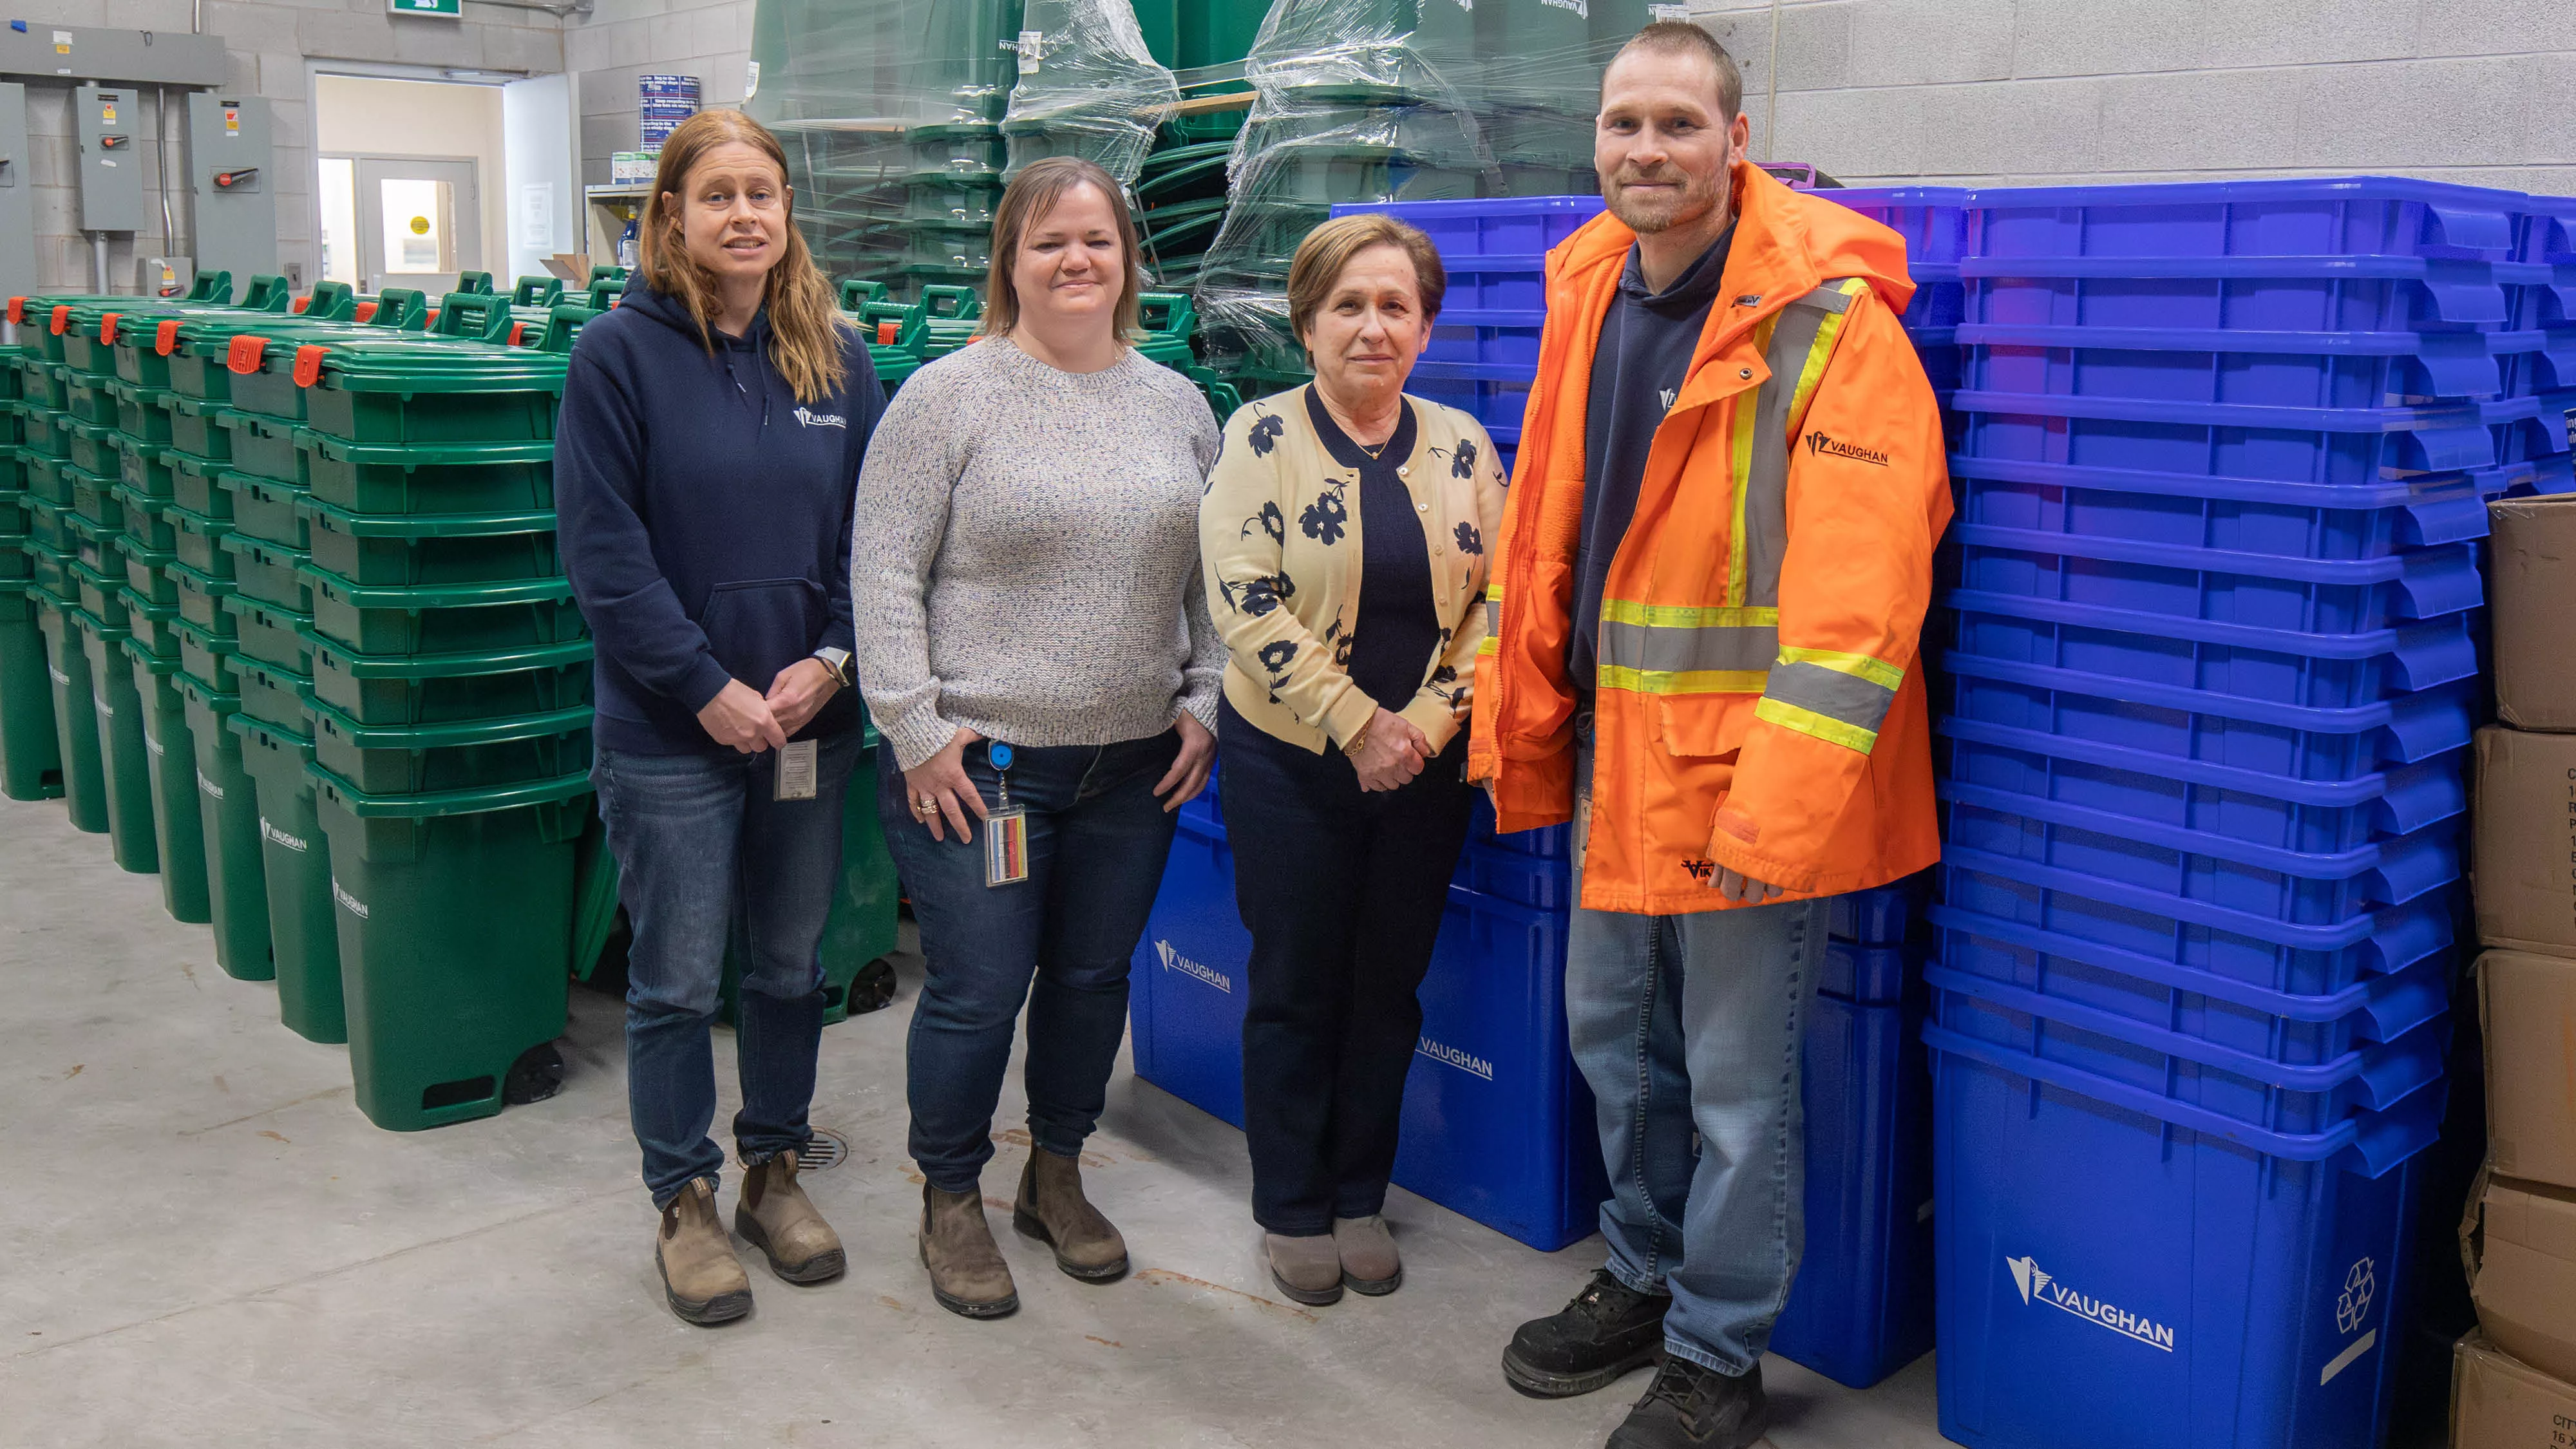 the solid waste management team